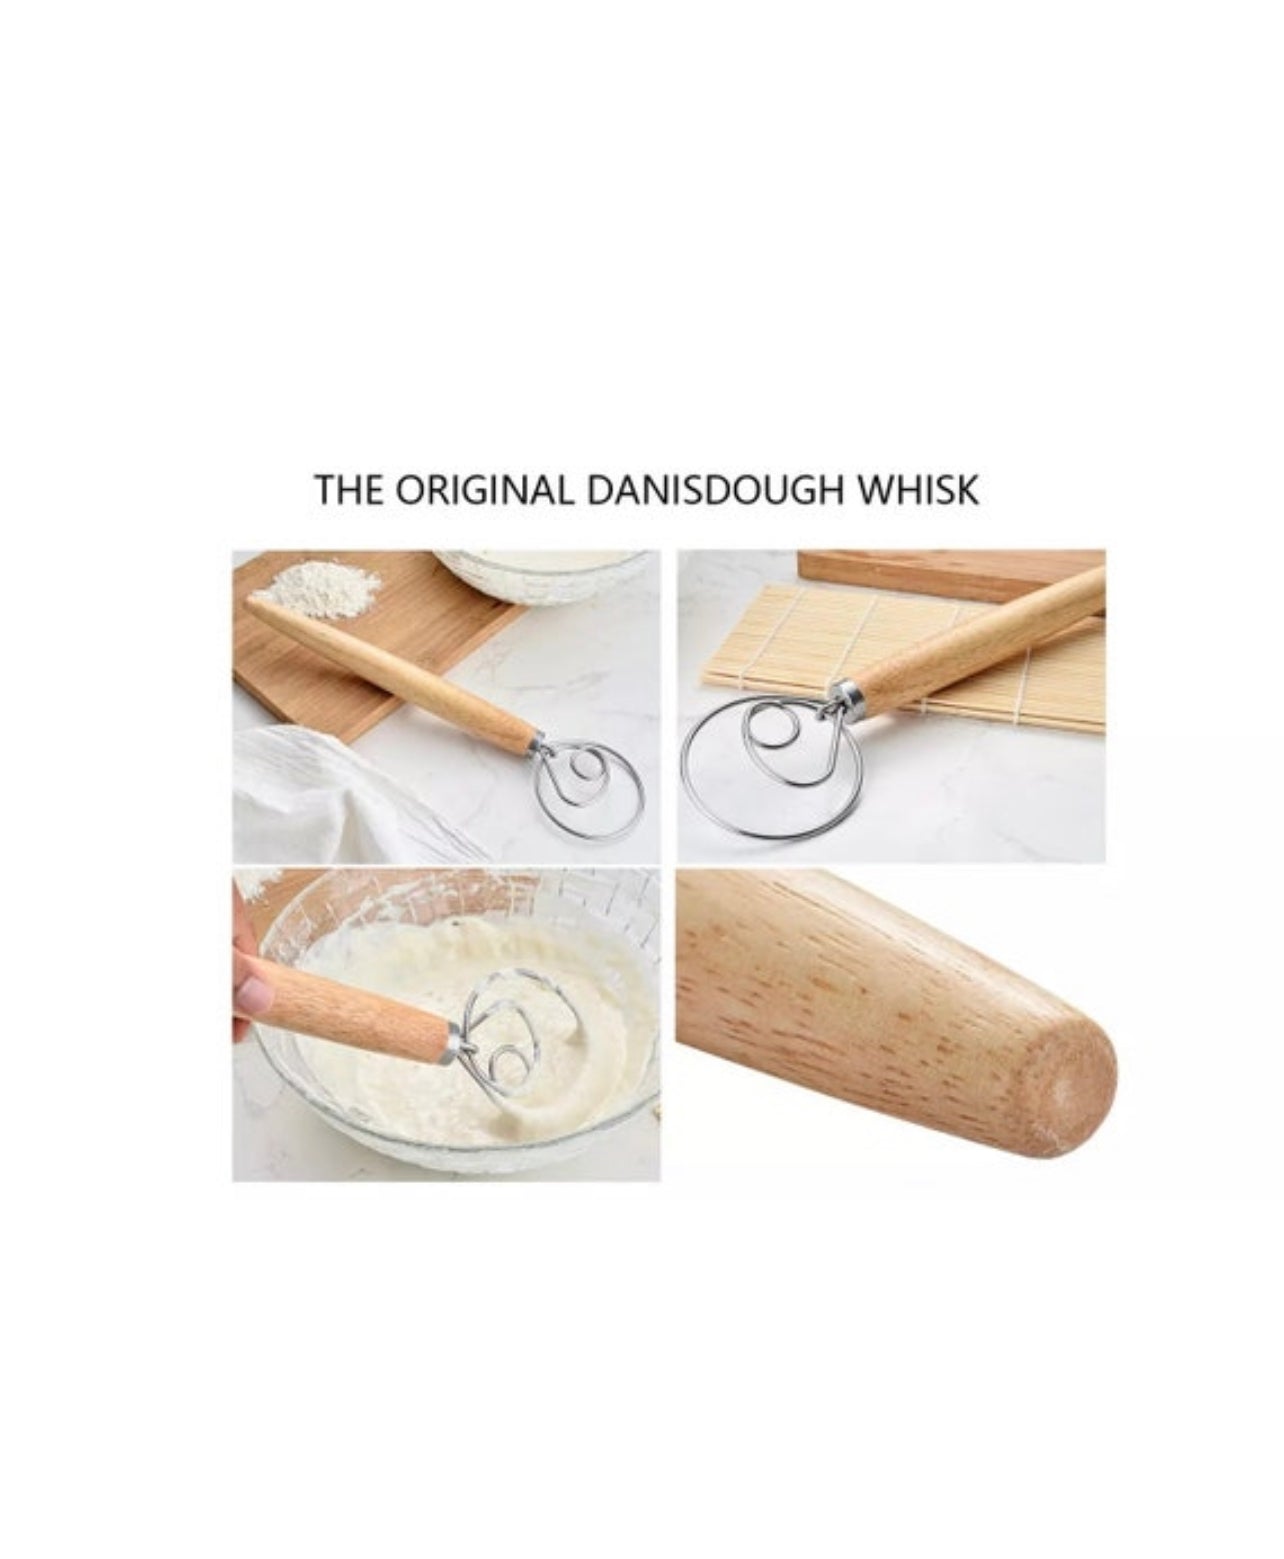 Bread Lame & Danish Dough Whisk mixer set, Hand Crafted by Oloriam - P –  Zen Maestro